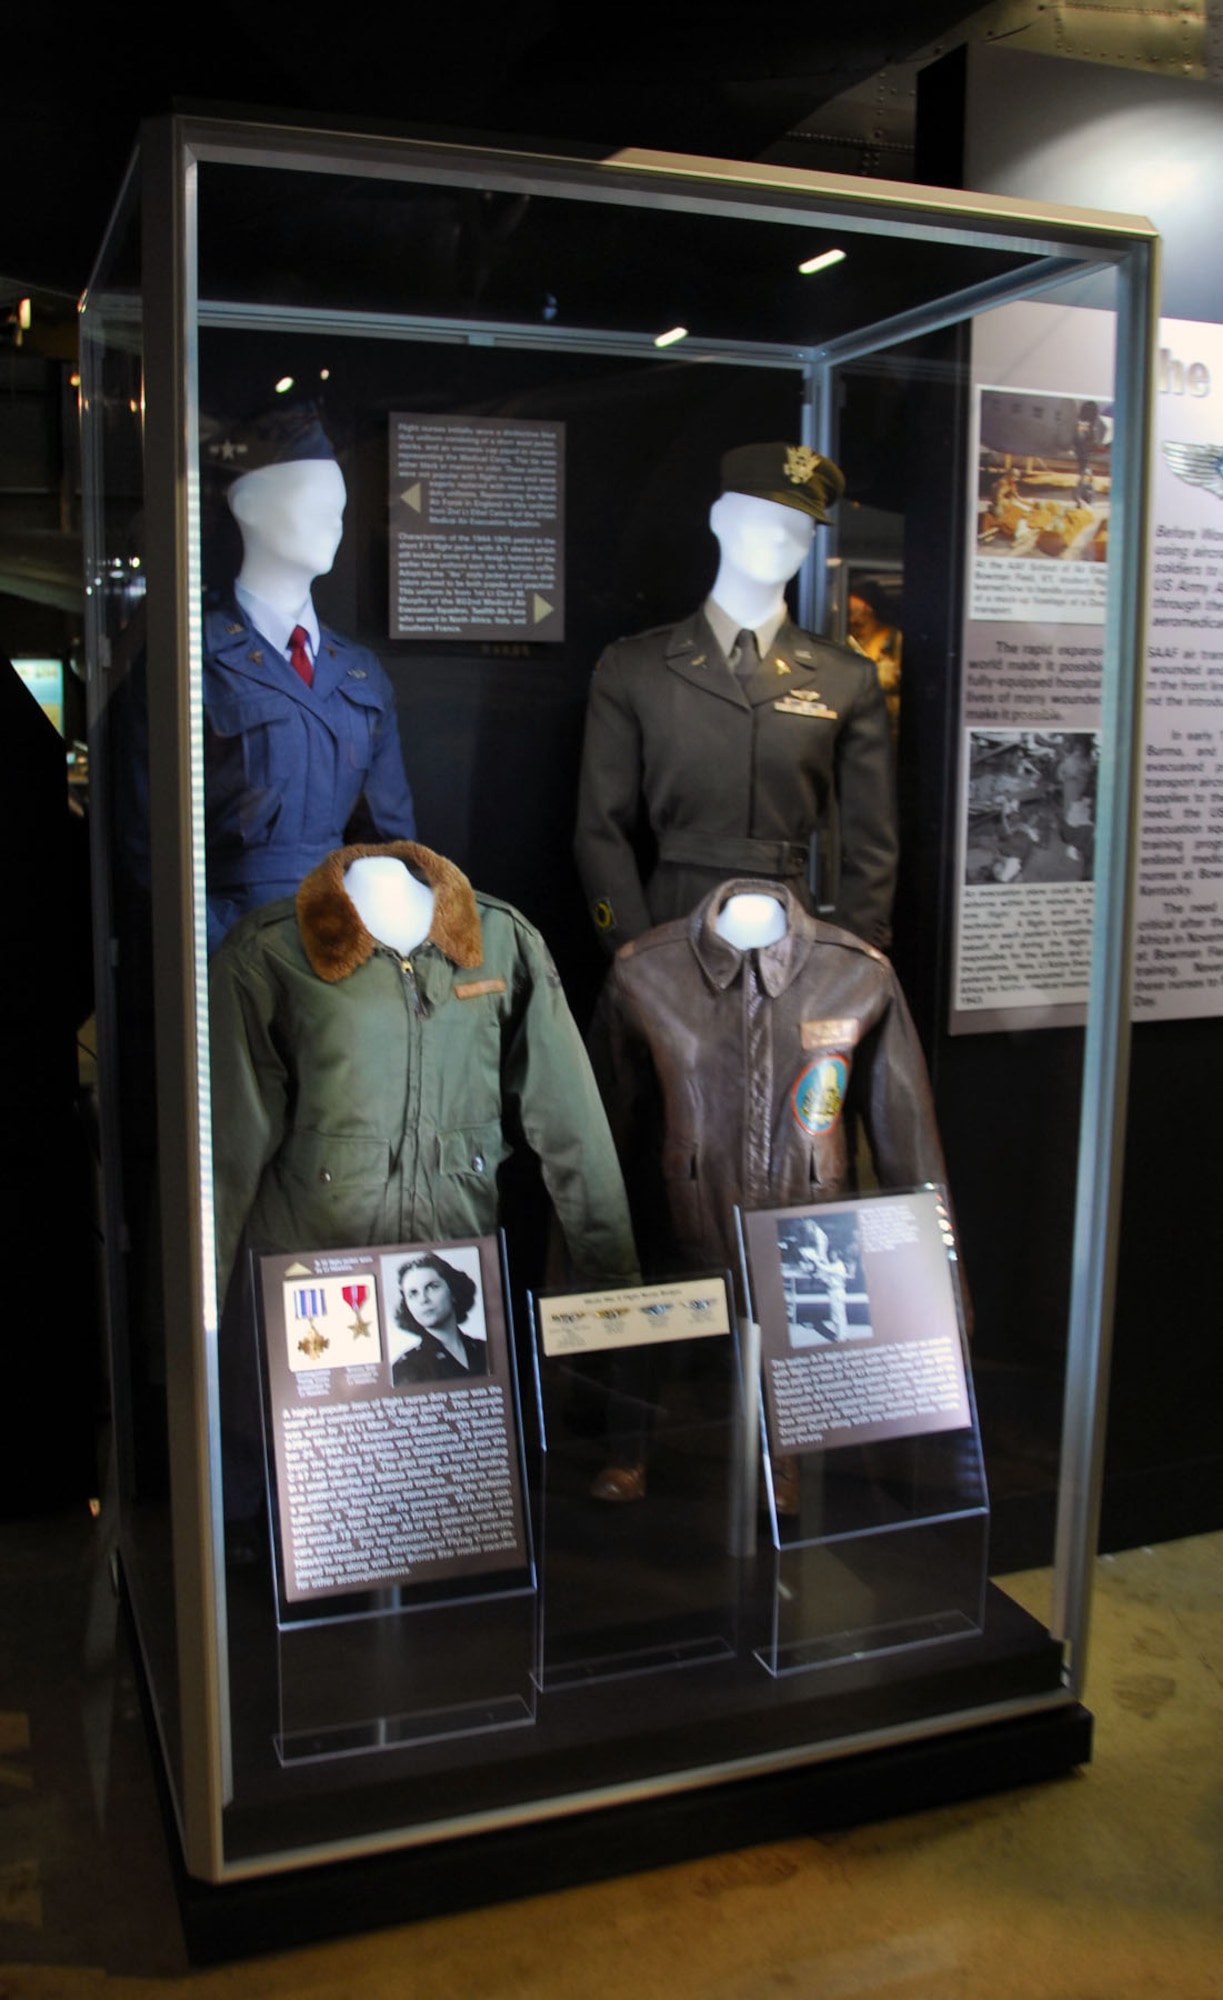 DAYTON, Ohio -- "Winged Angels: USAAF Flight Nurses in WWII" exhibit in the World War II Gallery at the National Museum of the U.S. Air Force. (U.S. Air Force photo)